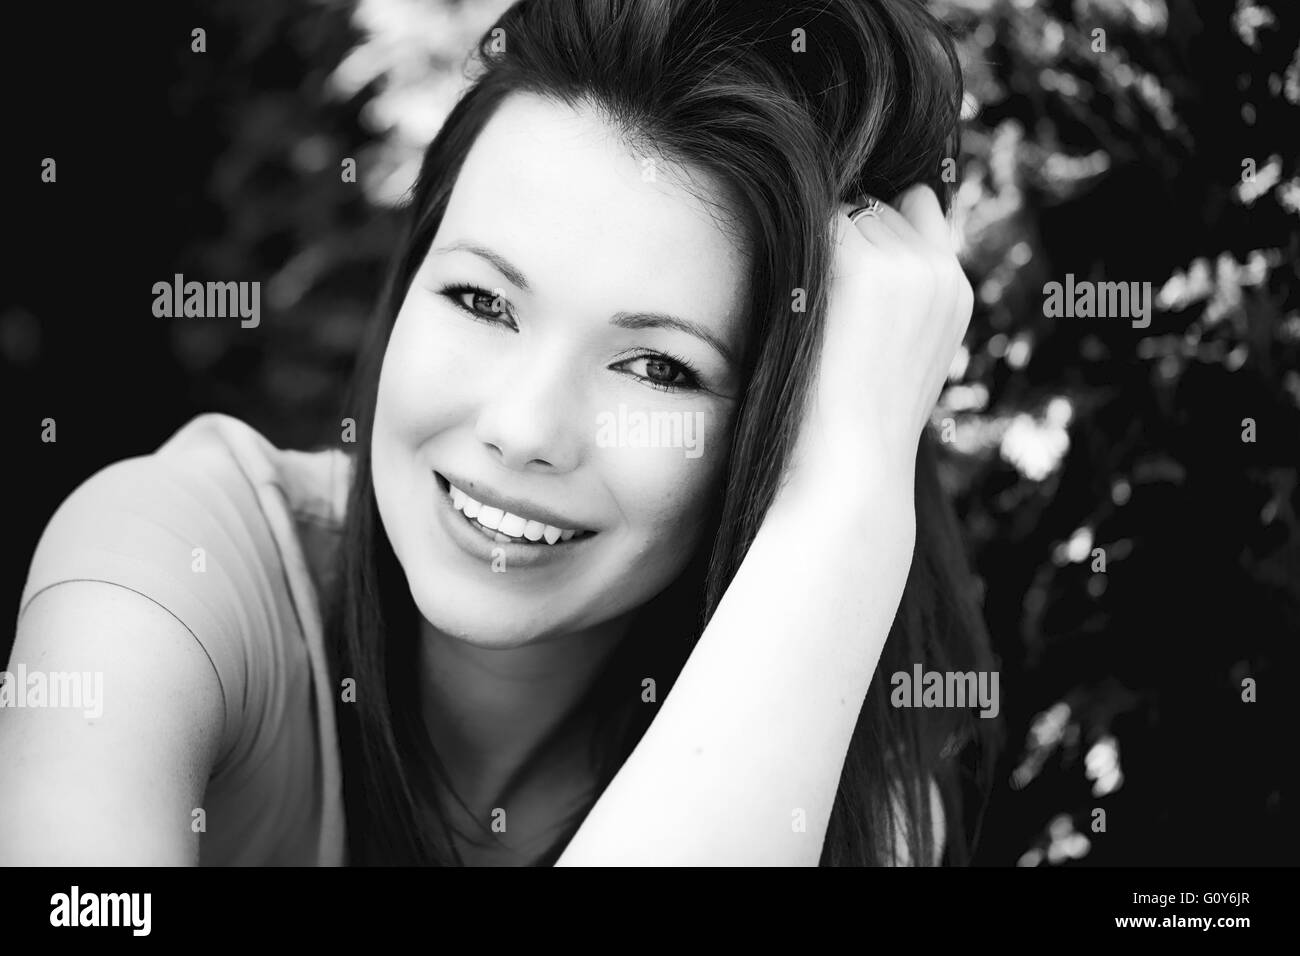 Black And White Portrait Of A Happy Smiling Woman Outside Stock Photo